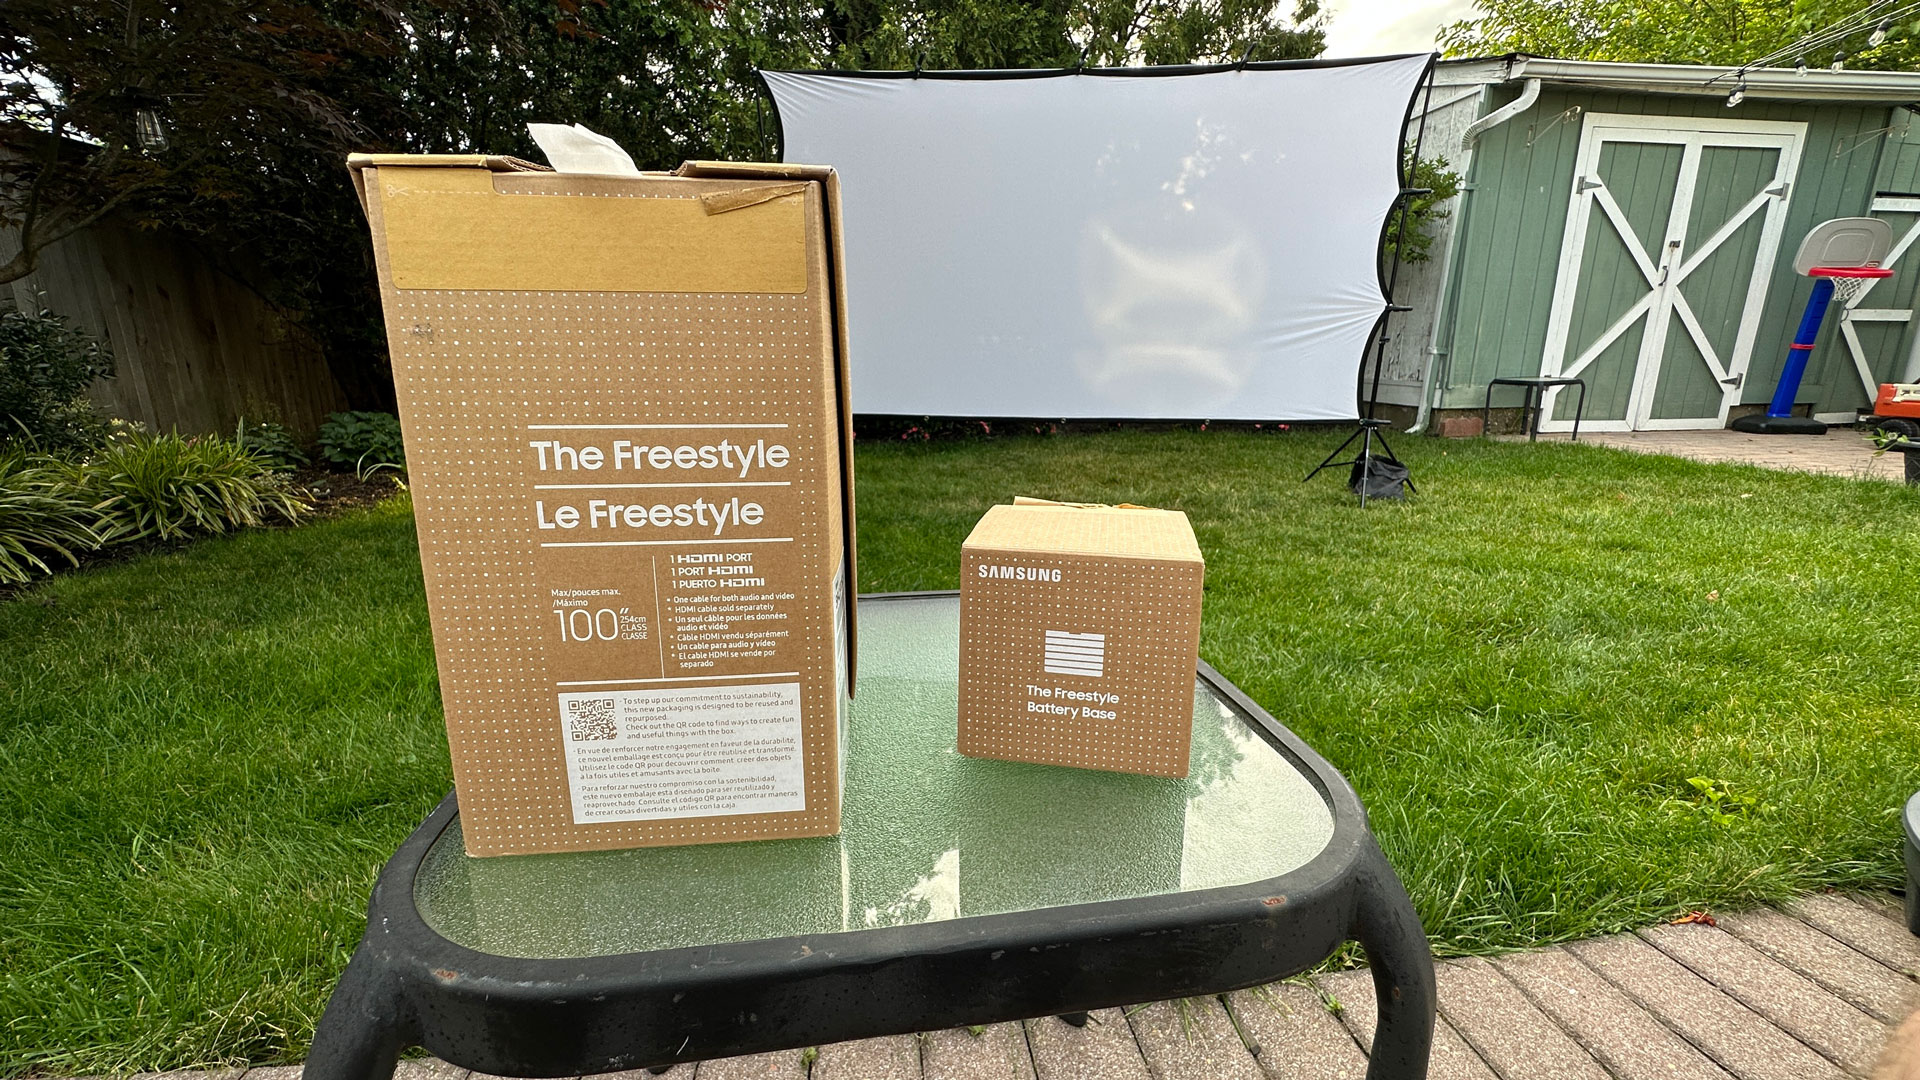 The Samsung Freestyle Blows Away My Old Bargain…